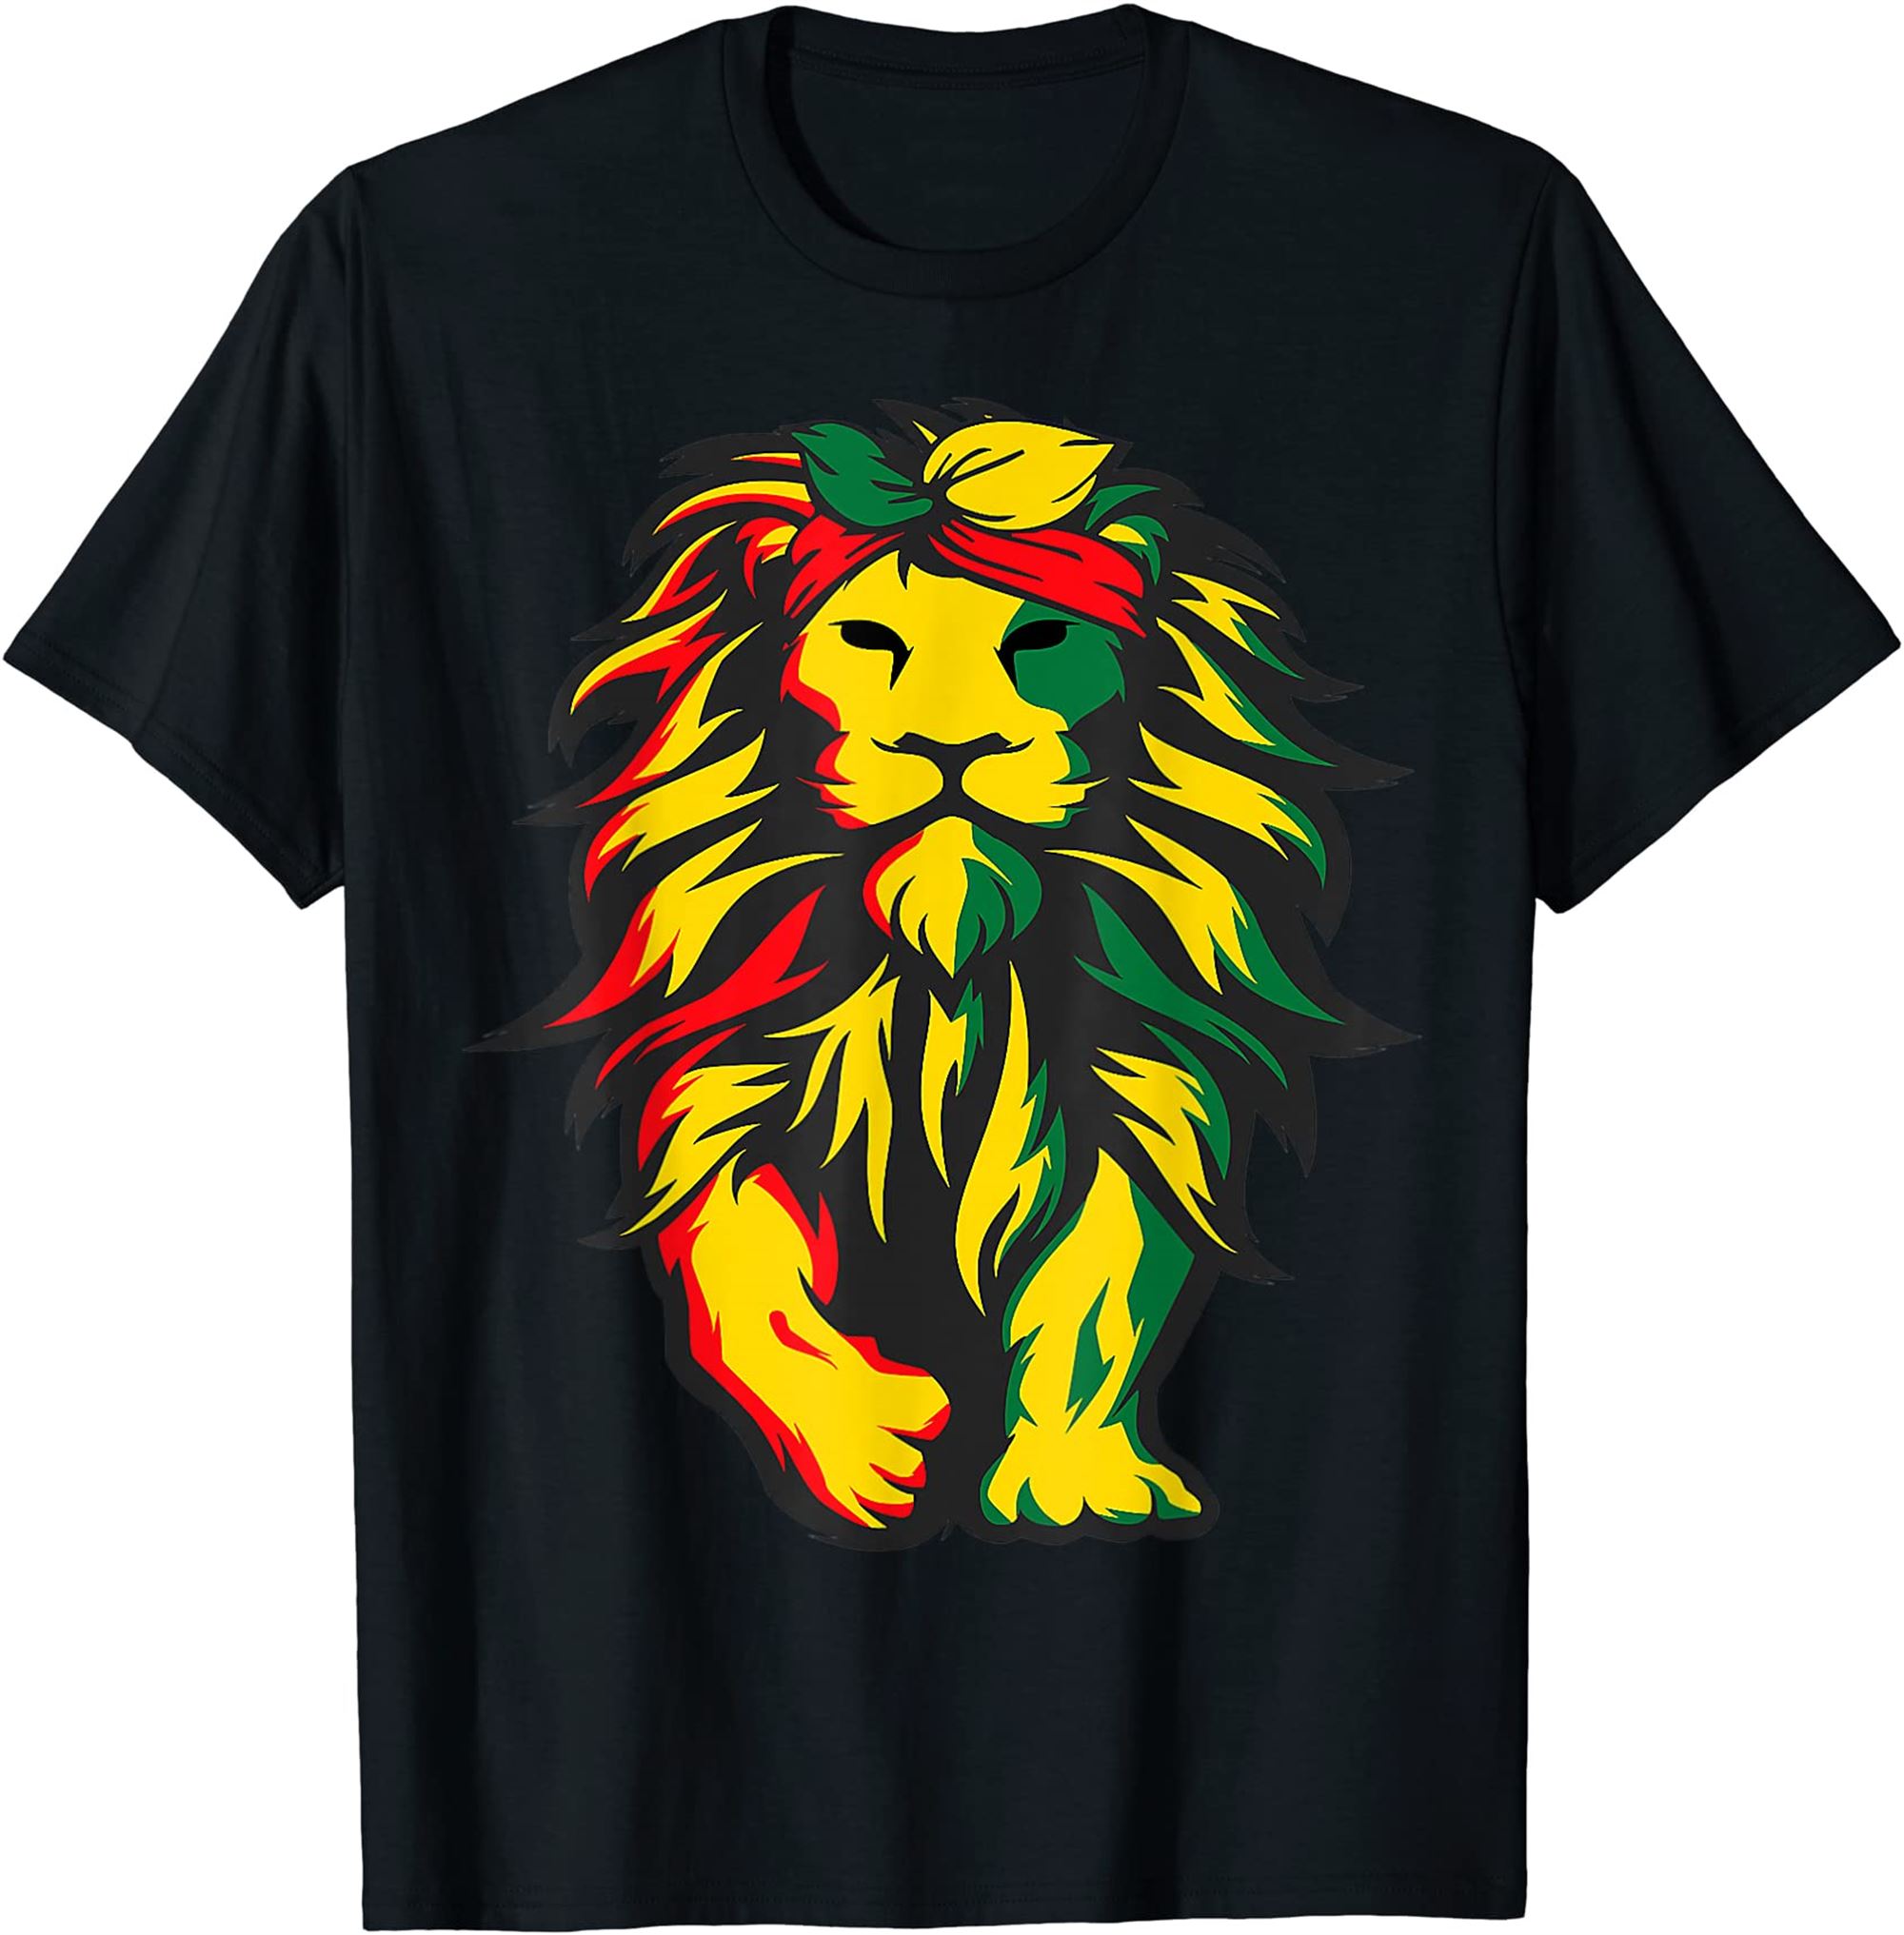 Lion Juneteenth Cool Black History African American Flag T-shirt Size Up To 5xl